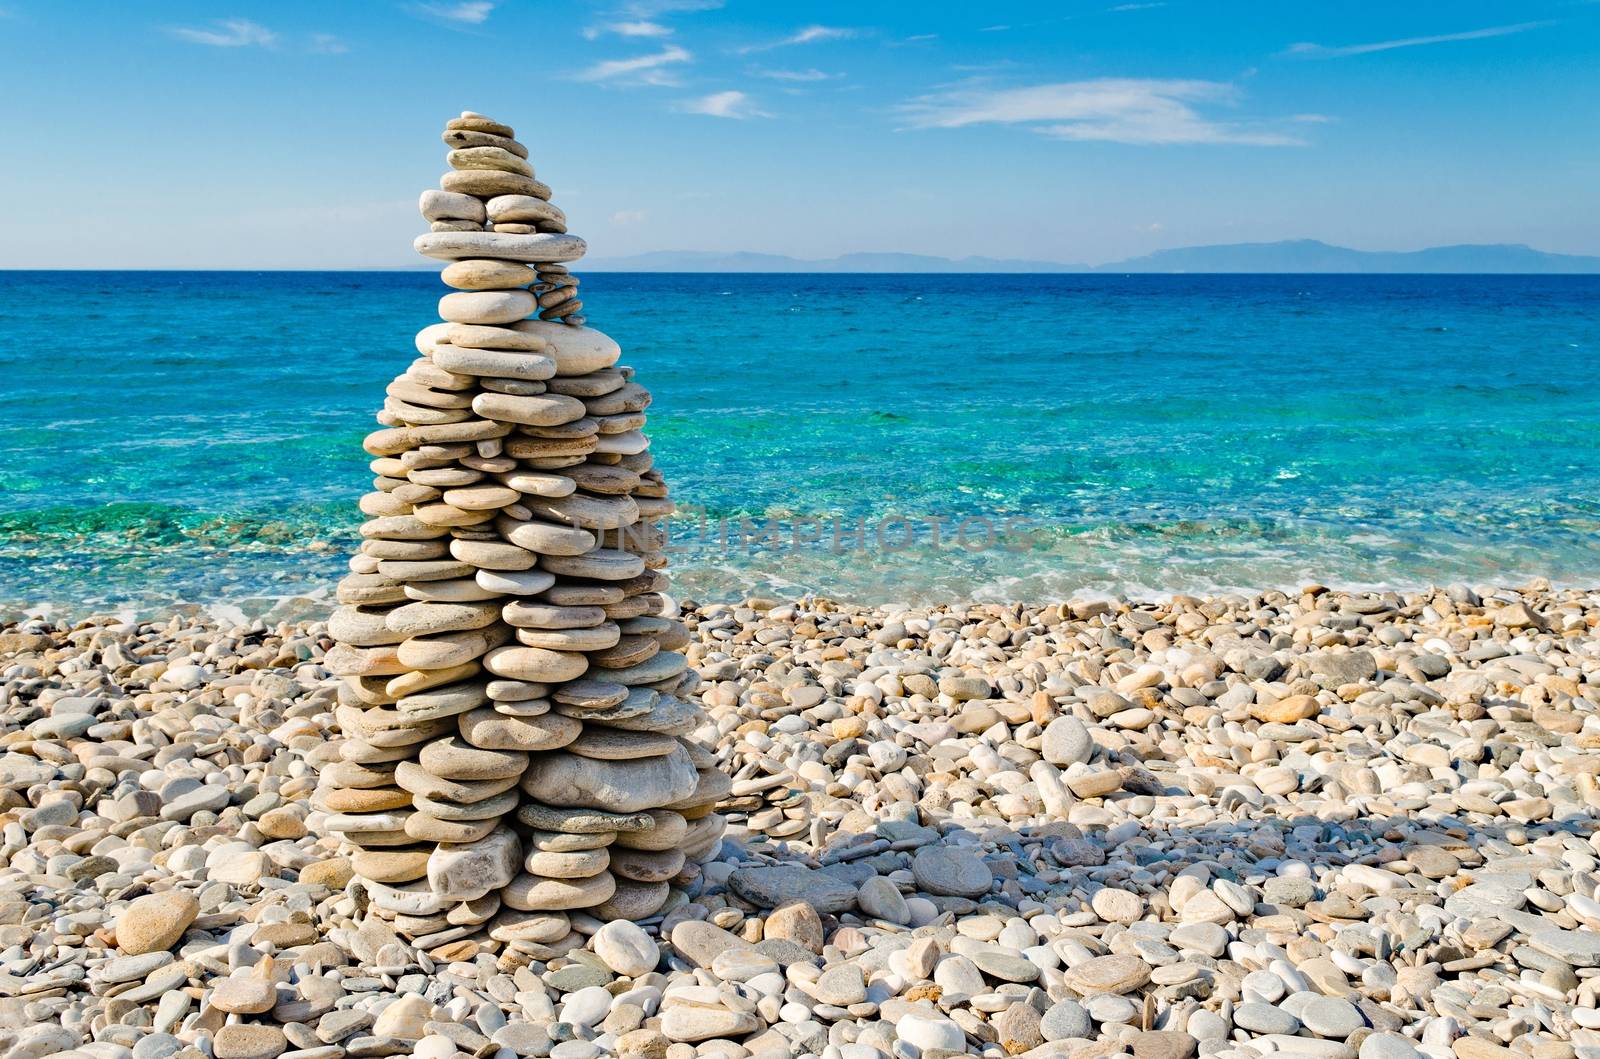 Pebble tower by PavelR52